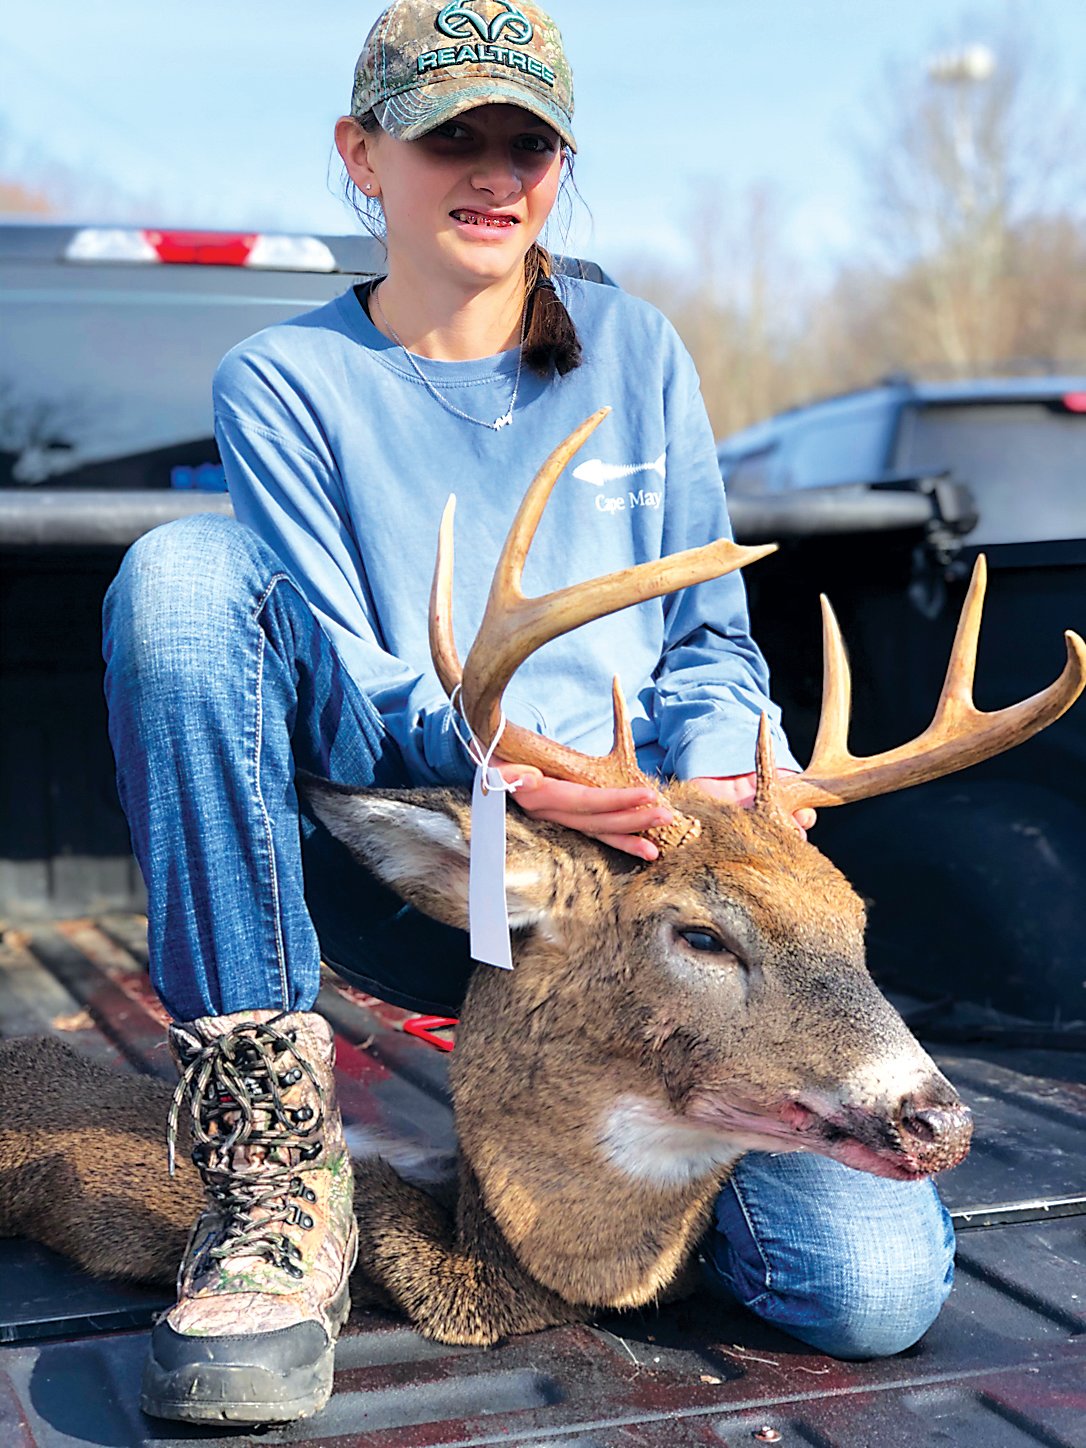 Abby Morse took an 8-pointer while hunting in Forestburgh on Monday, November 20. The buck had identical 18-inch beams and a spread of 17.25. The buck weighed 130 pounds and scored a 61.25.